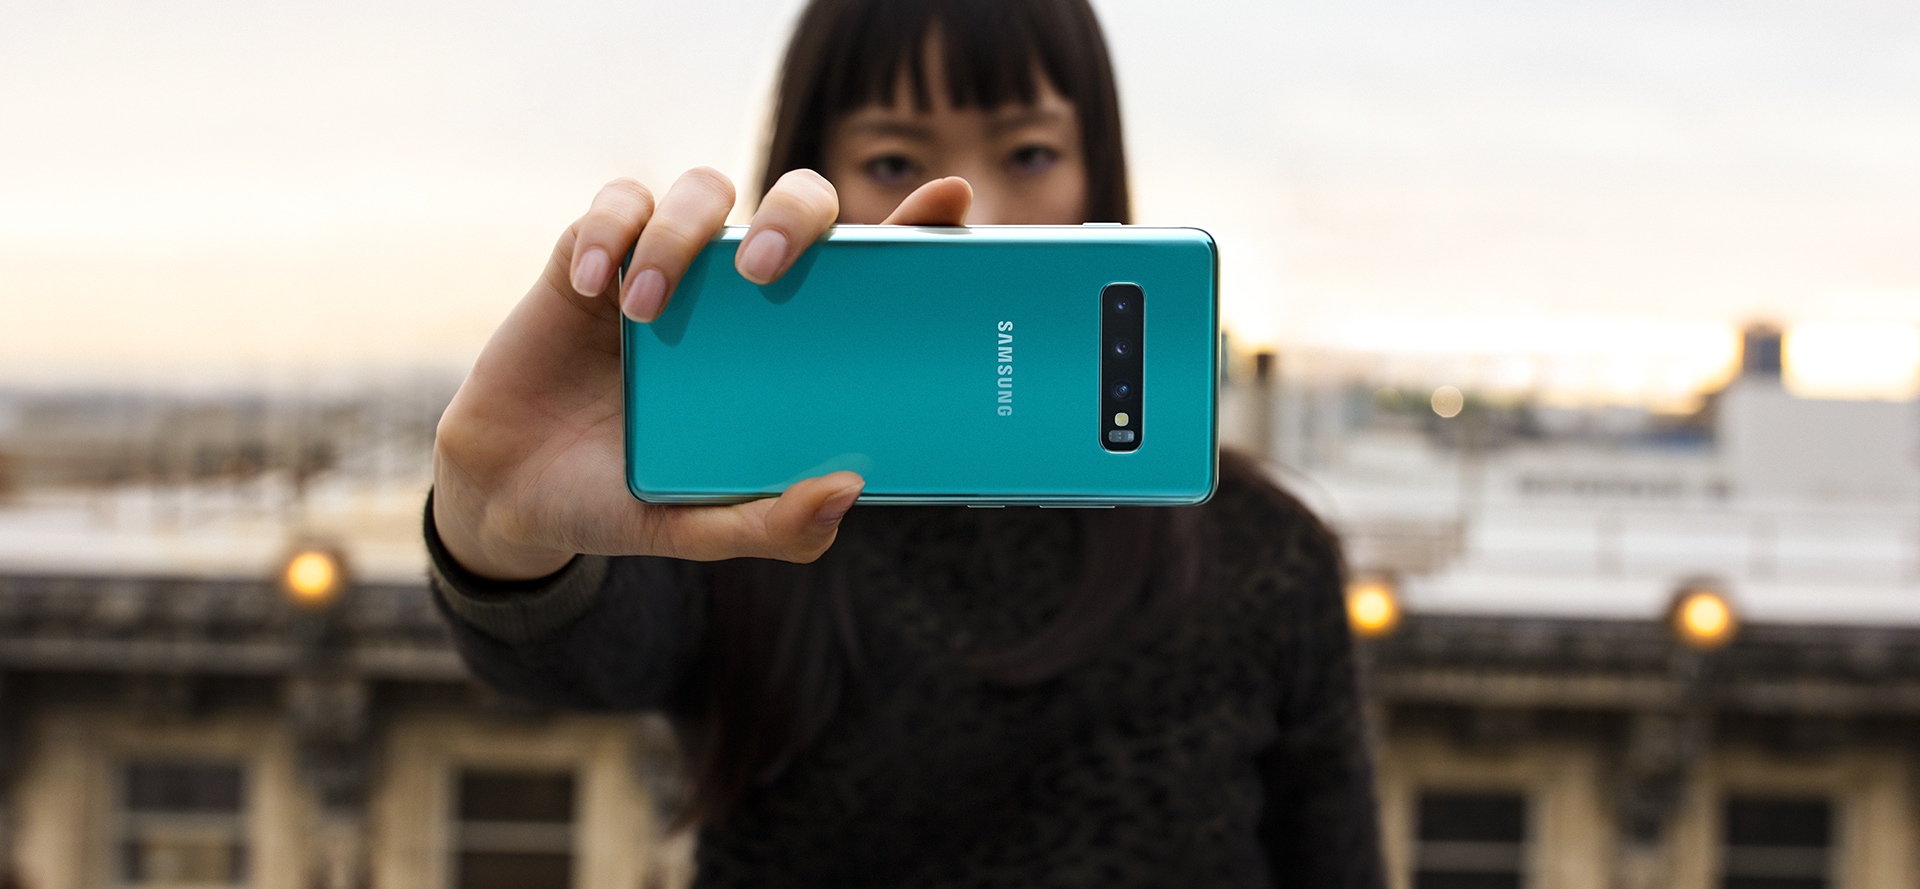 A woman holding Galaxy S10 plus in Prism Green to show the Pro-grade three camera system.